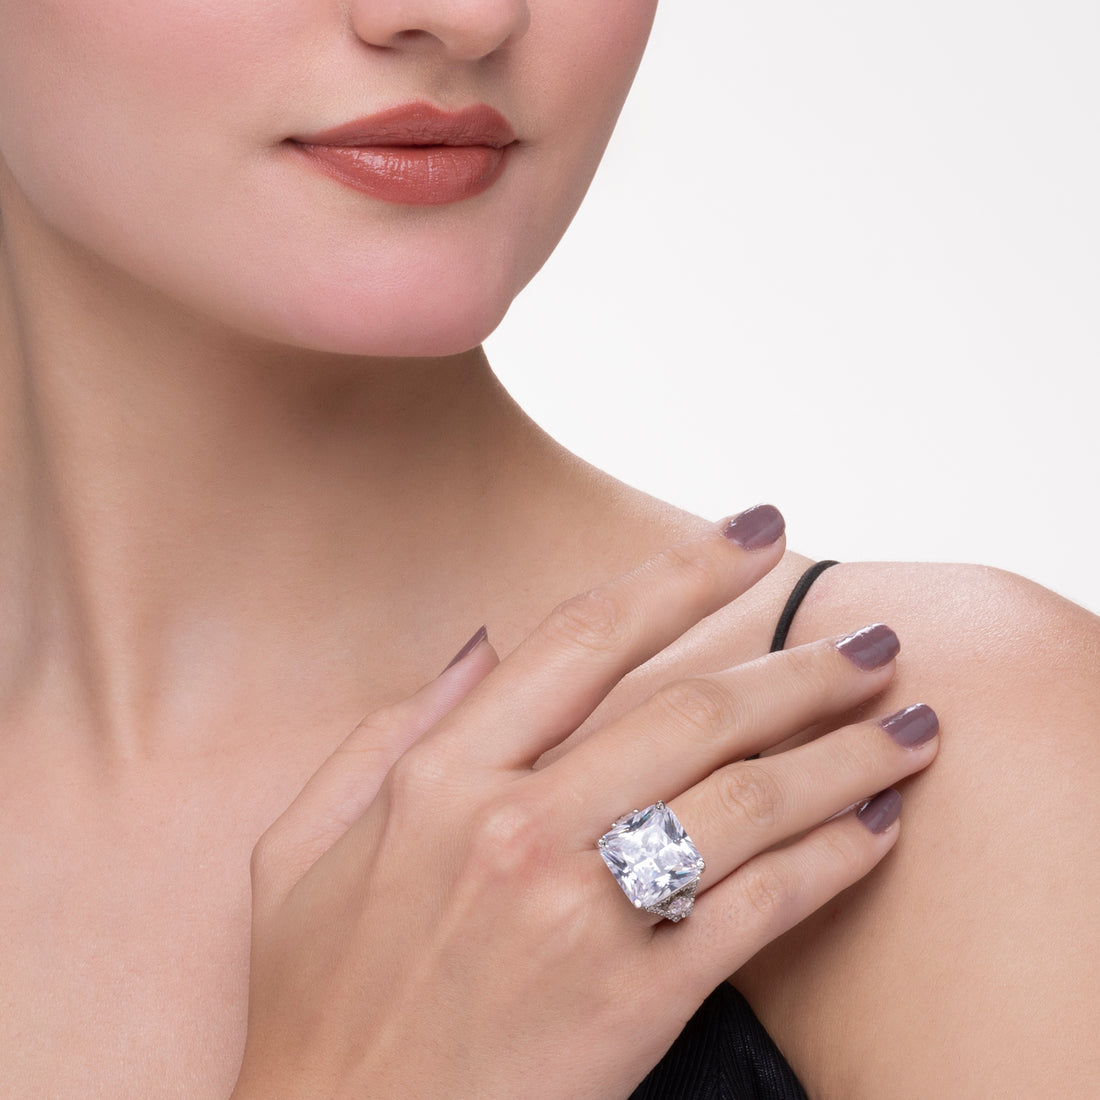 PRAO's Lustrous Solitaire Ring